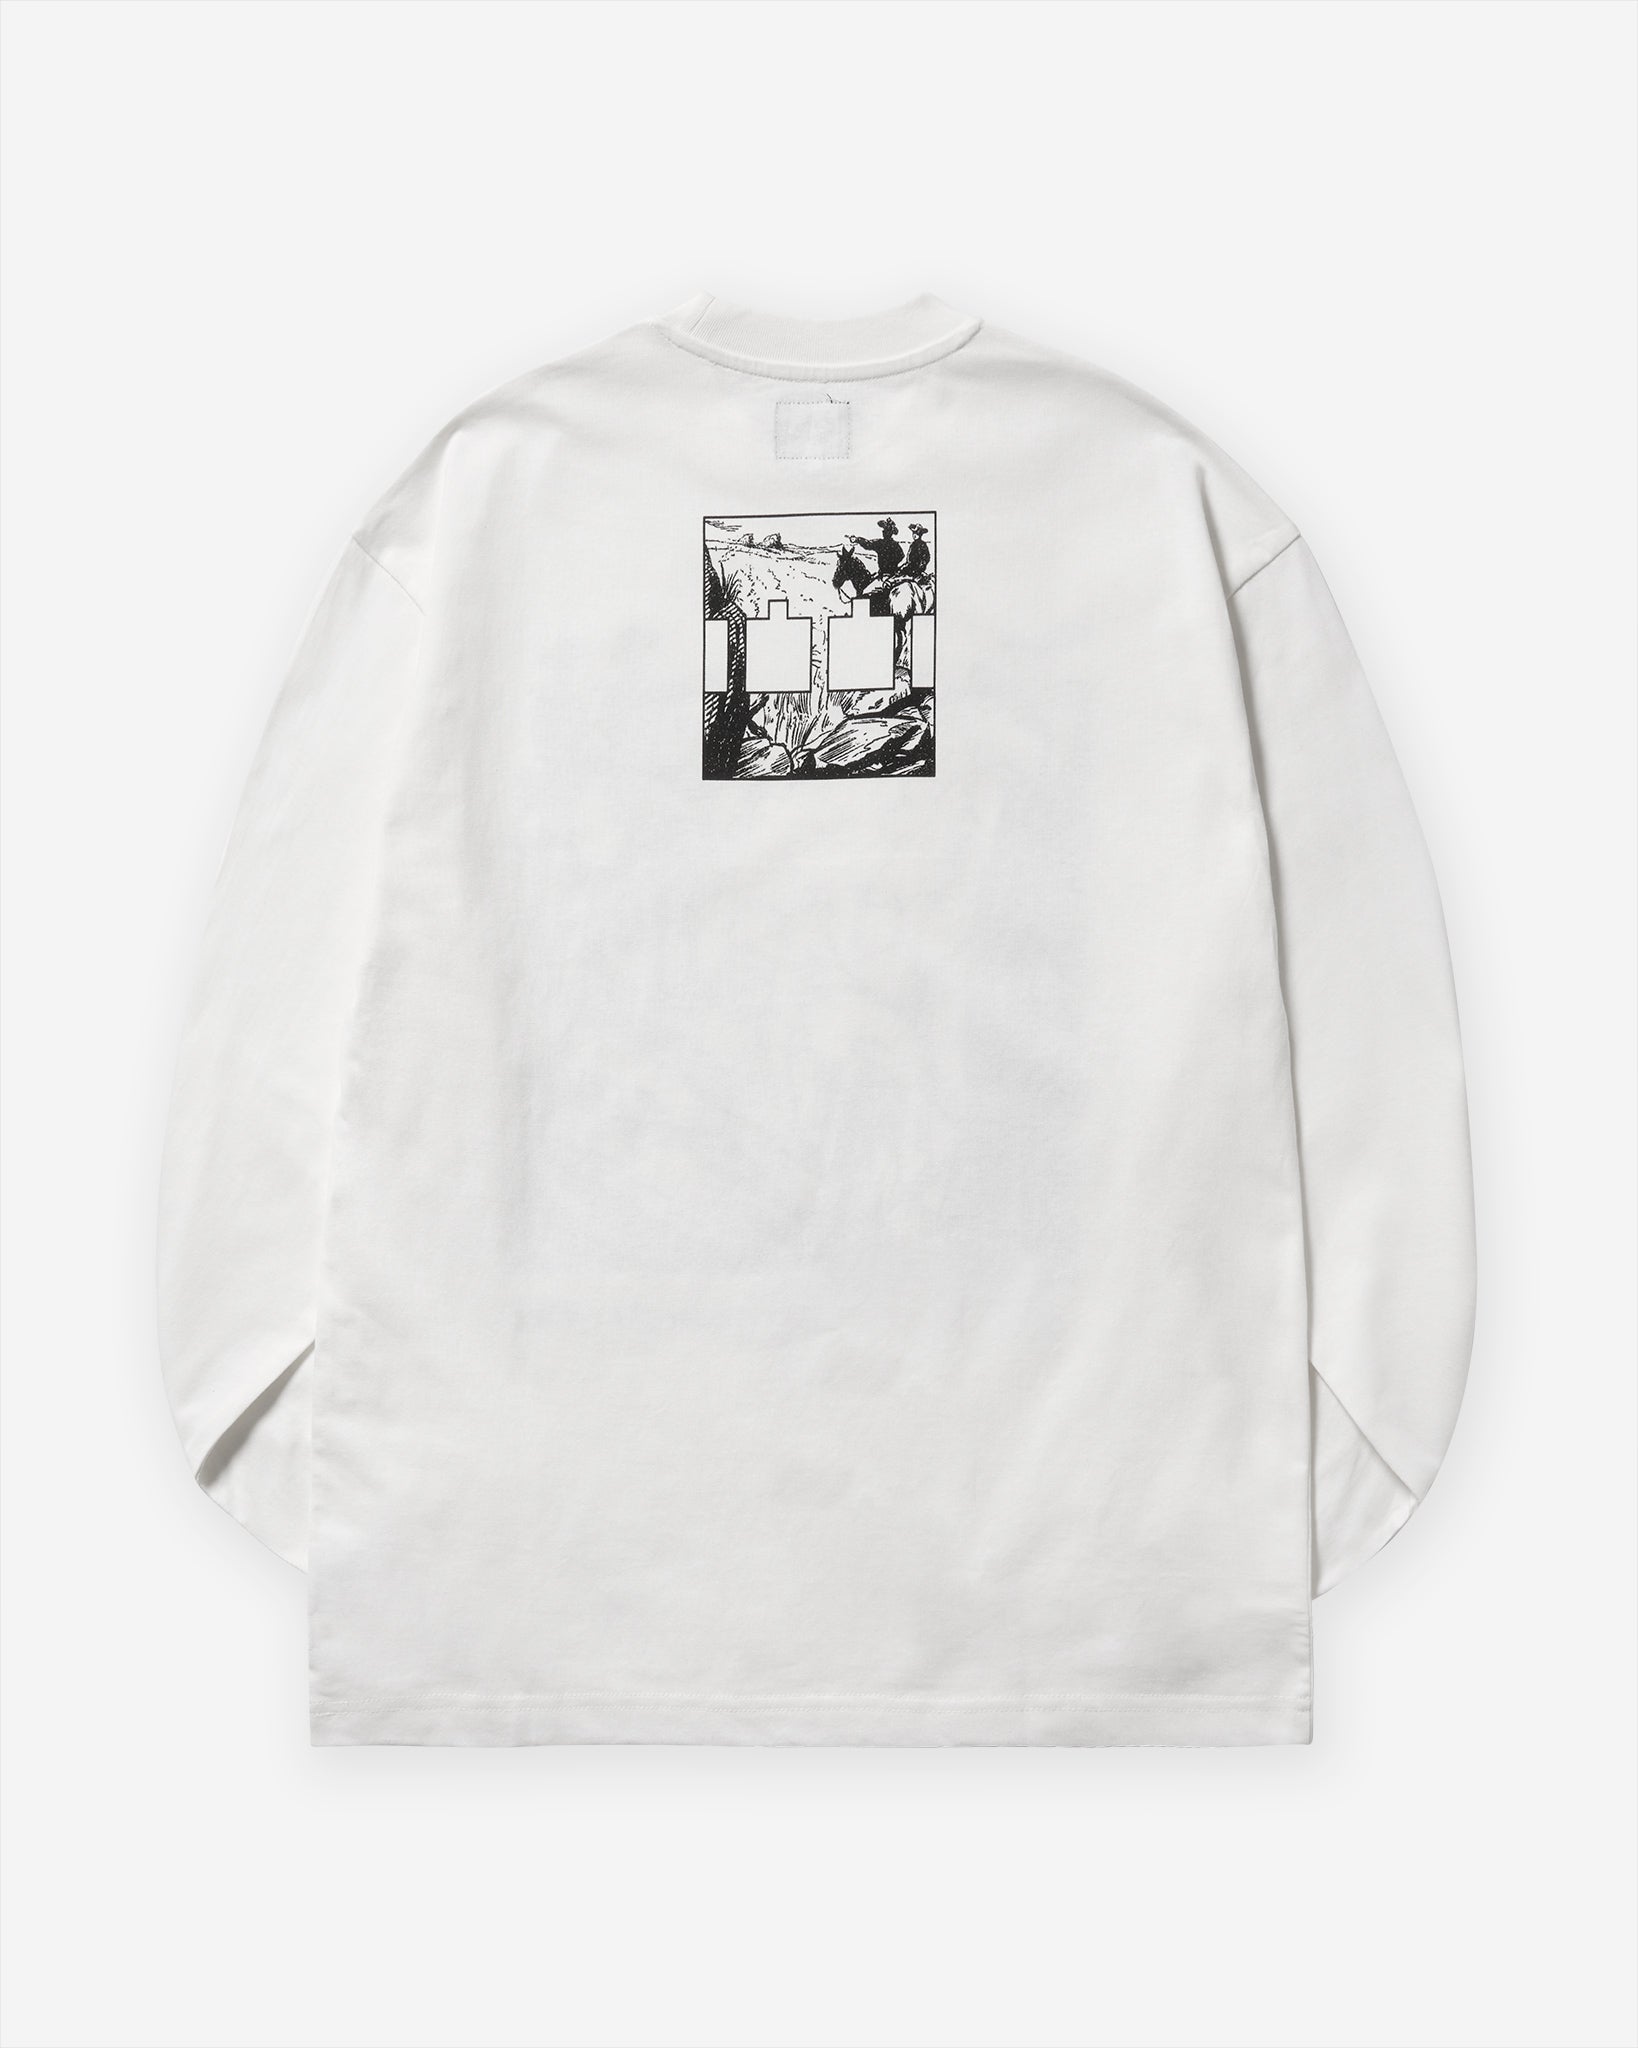 Two Dark Humps Long Sleeve - White